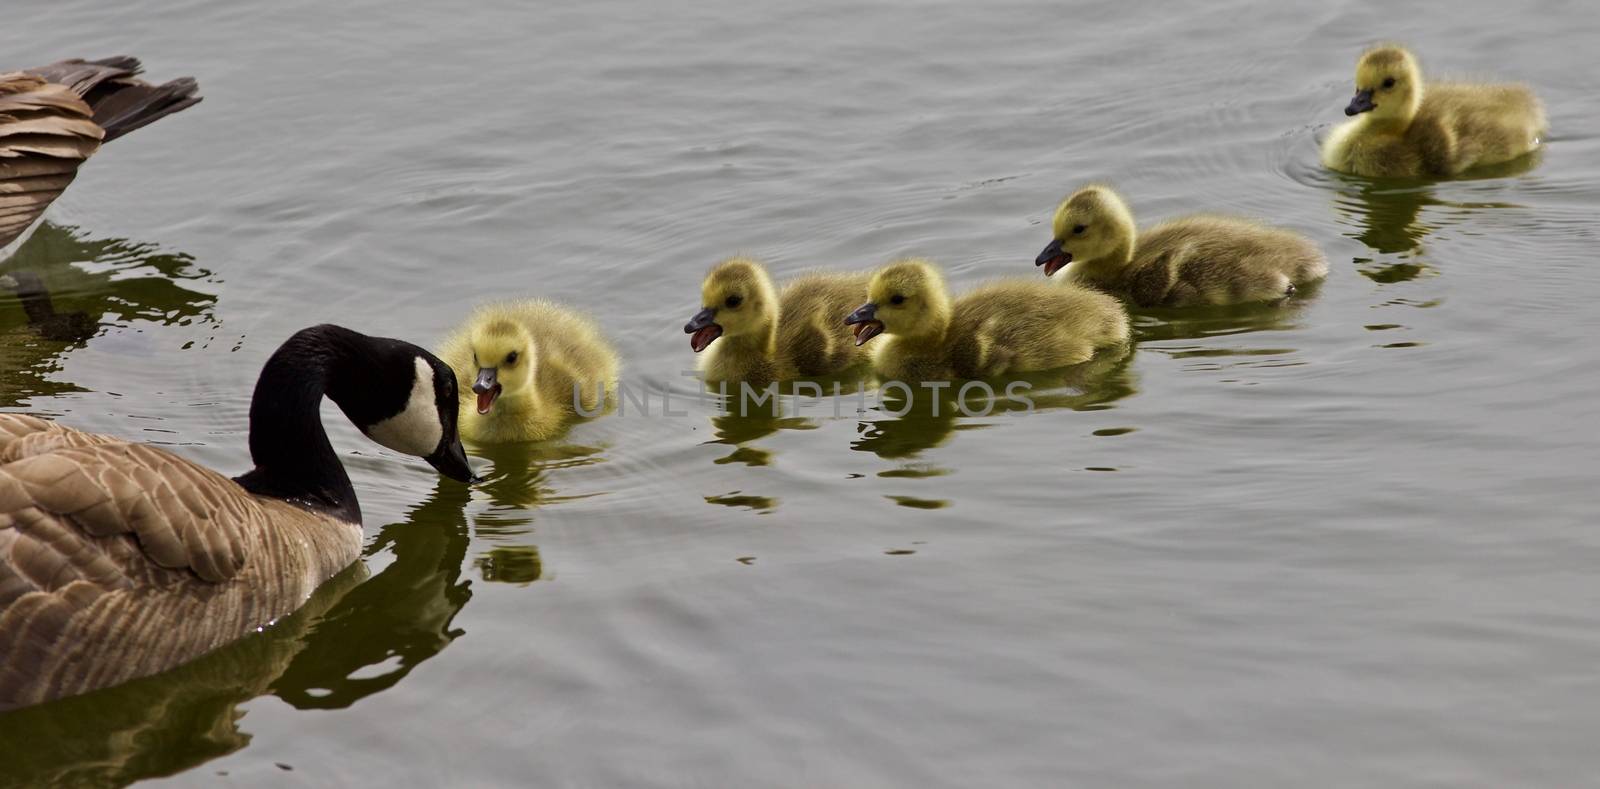 Beautiful isolated image of a young family of Canada geese swimming by teo